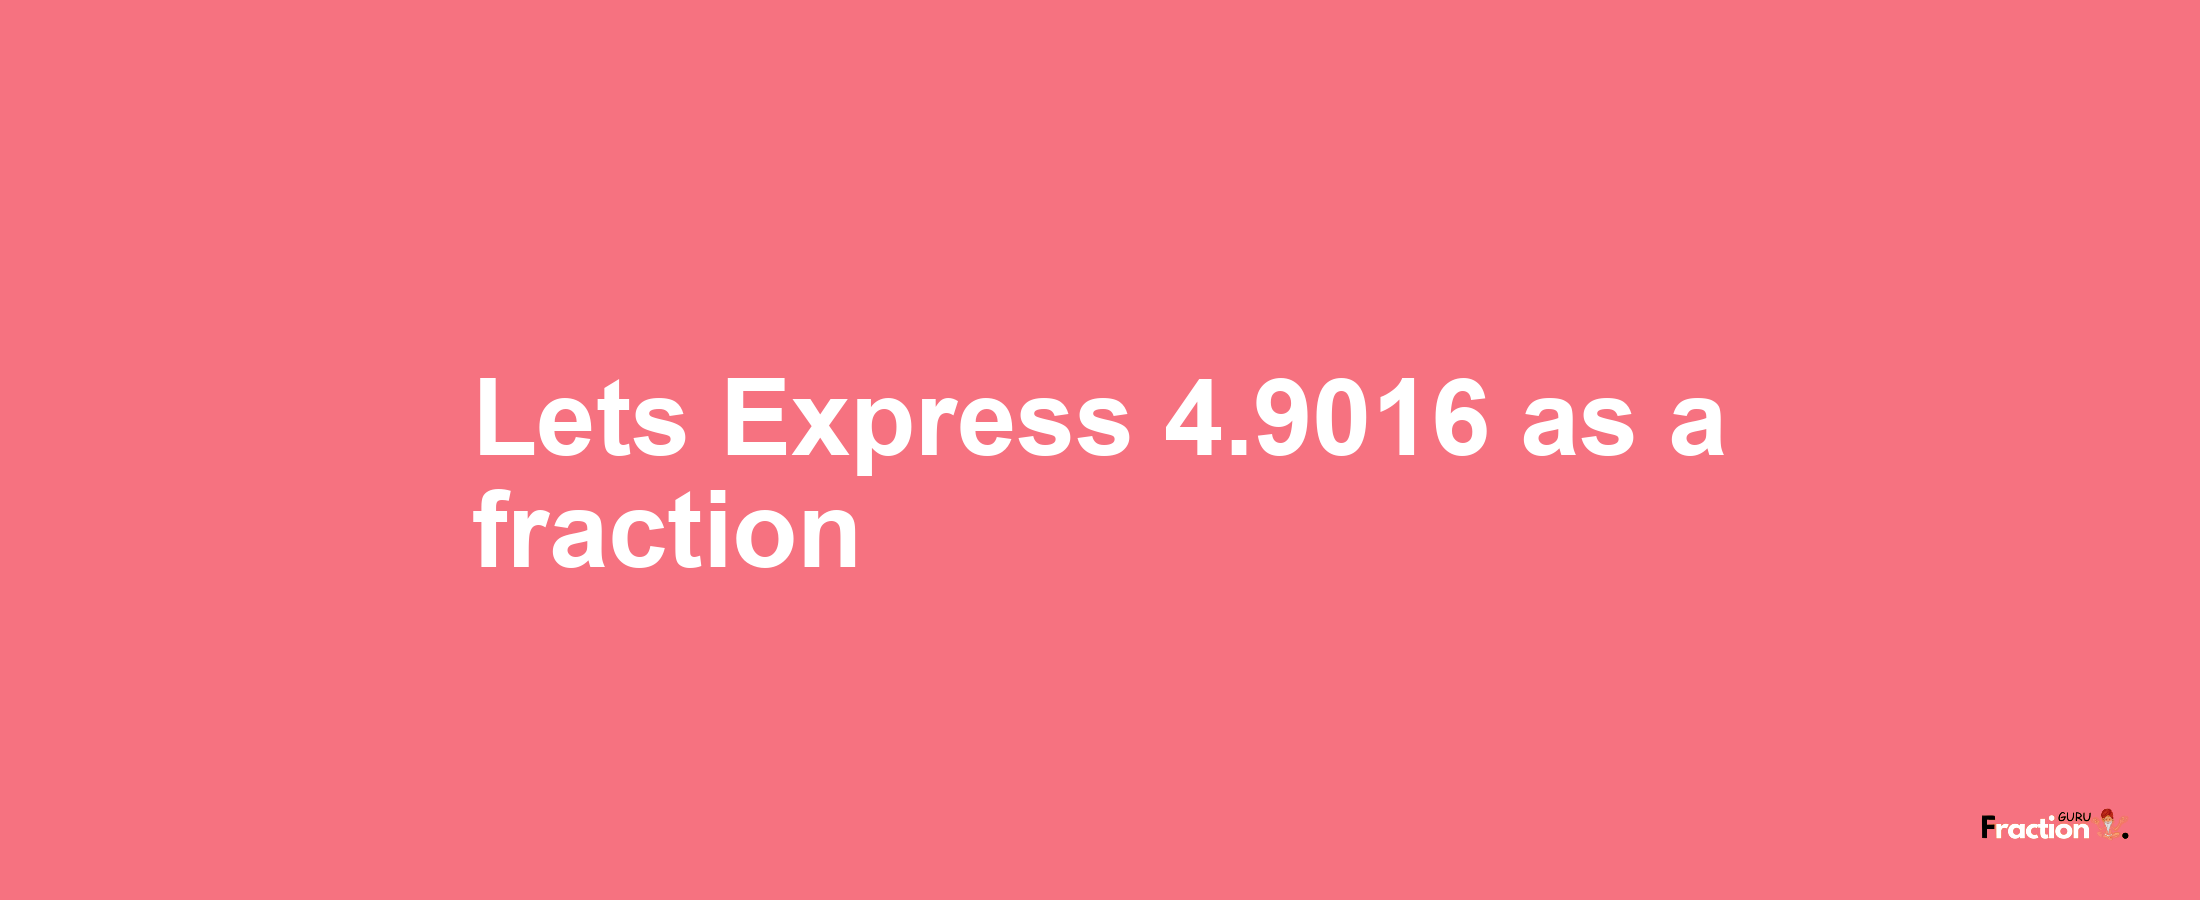 Lets Express 4.9016 as afraction